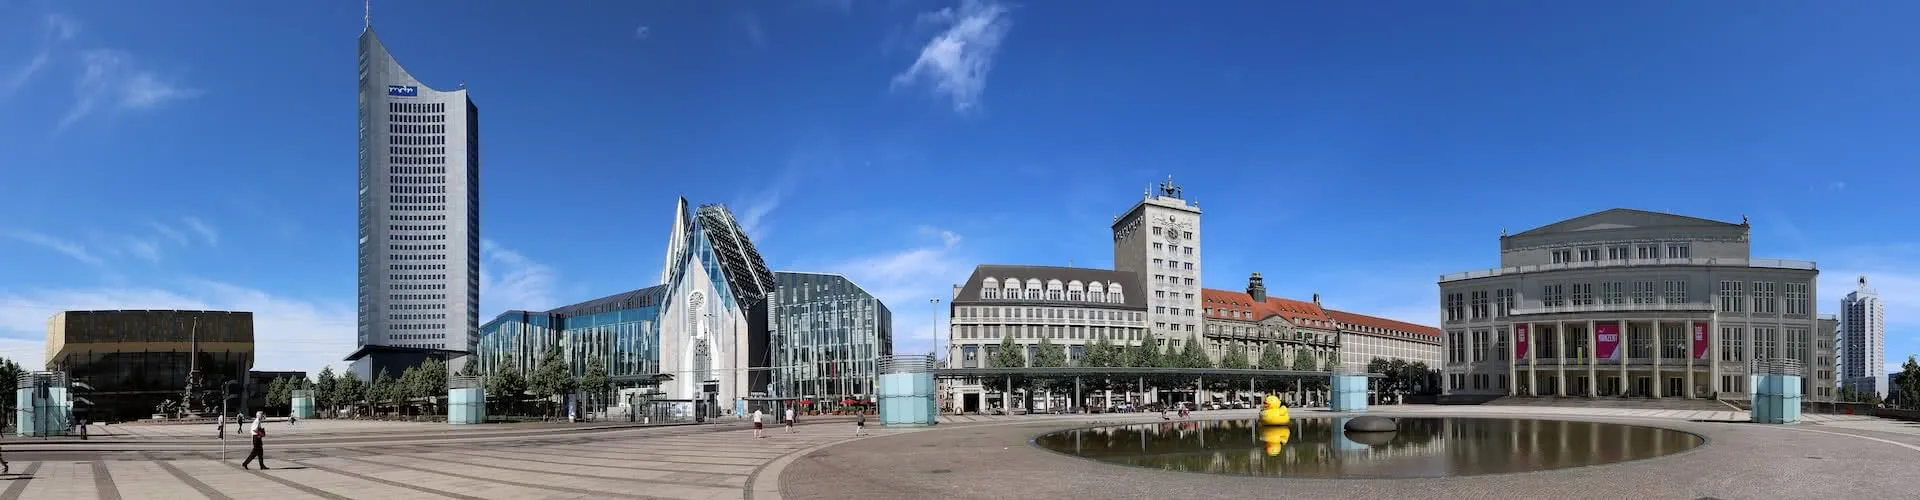 Leipzig - the destination for exhibition hotels